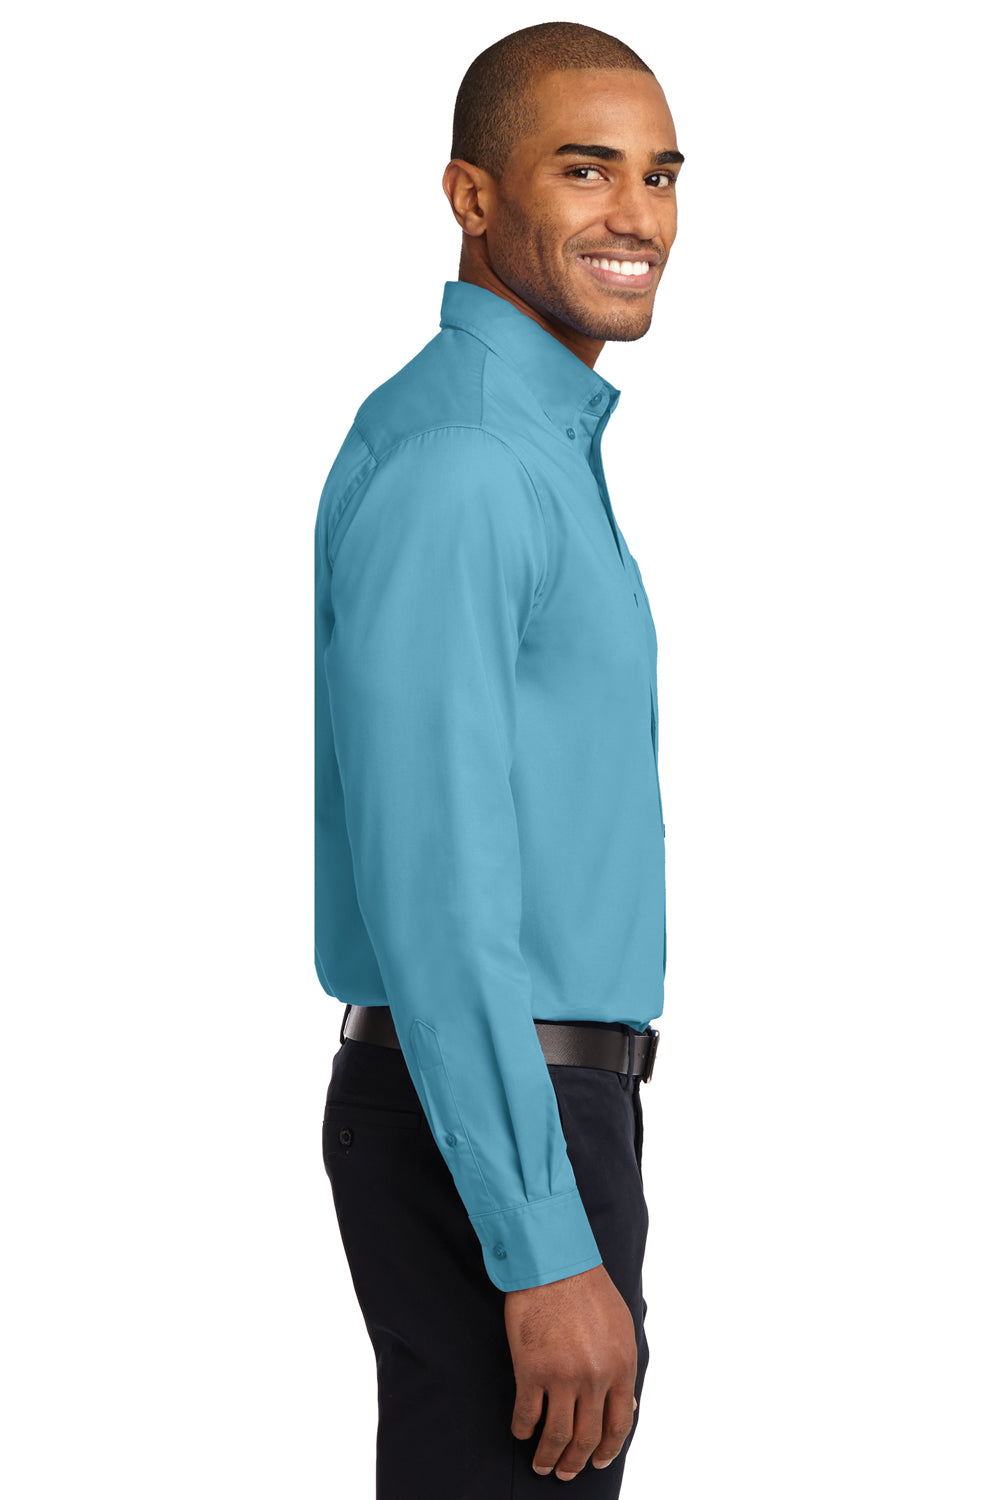 Port Authority S608/TLS608/S608ES Mens Easy Care Wrinkle Resistant Long Sleeve Button Down Shirt w/ Pocket Maui Blue Side